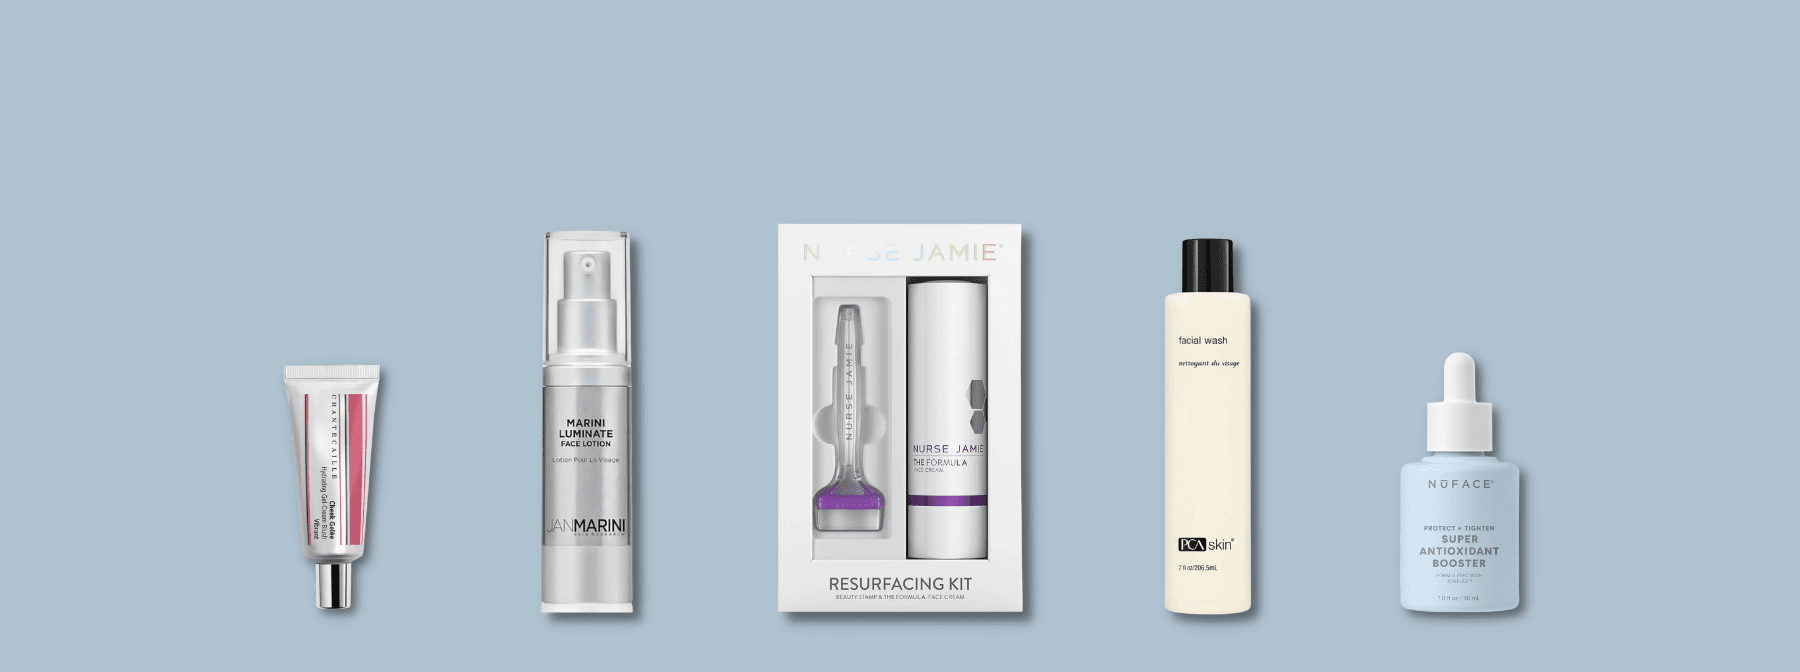 Female Brand Founders and Executives Share Their Must-Have Beauty Products